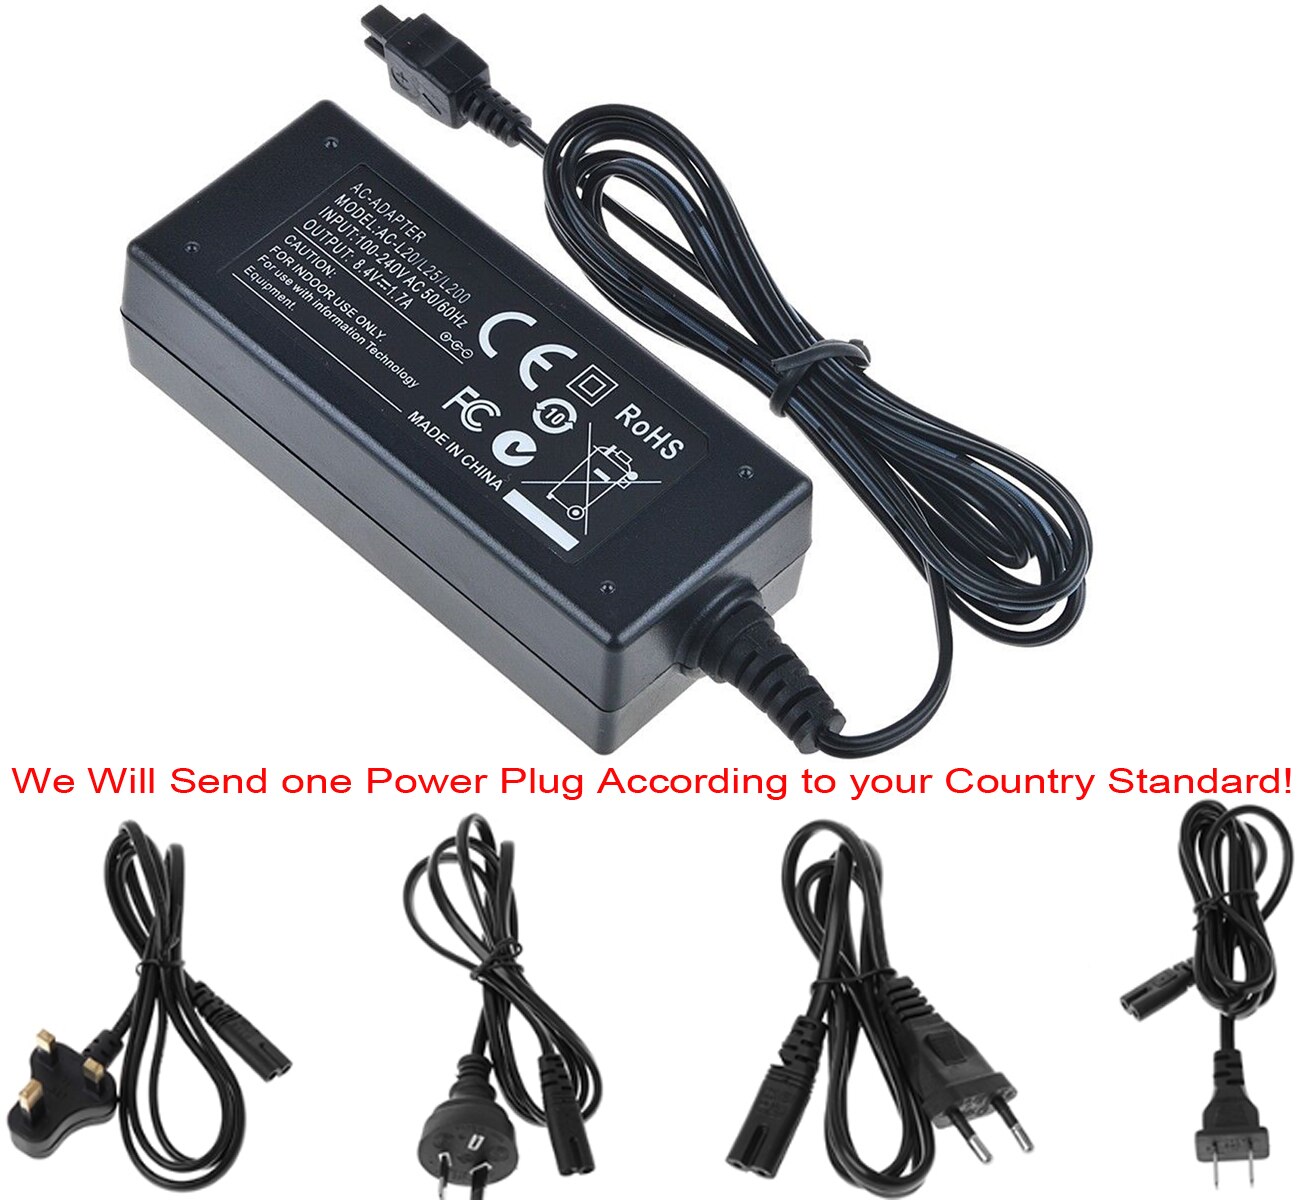 Usb Power Adapter Oplader Voor Sony DCR-SR32, DCR-SR42, DCR-SR42A, DCR-SR52, DCR-SR62, DCR-SR72, DCR-SR82 Handycam Camcorder: 1x AC Power Adapter